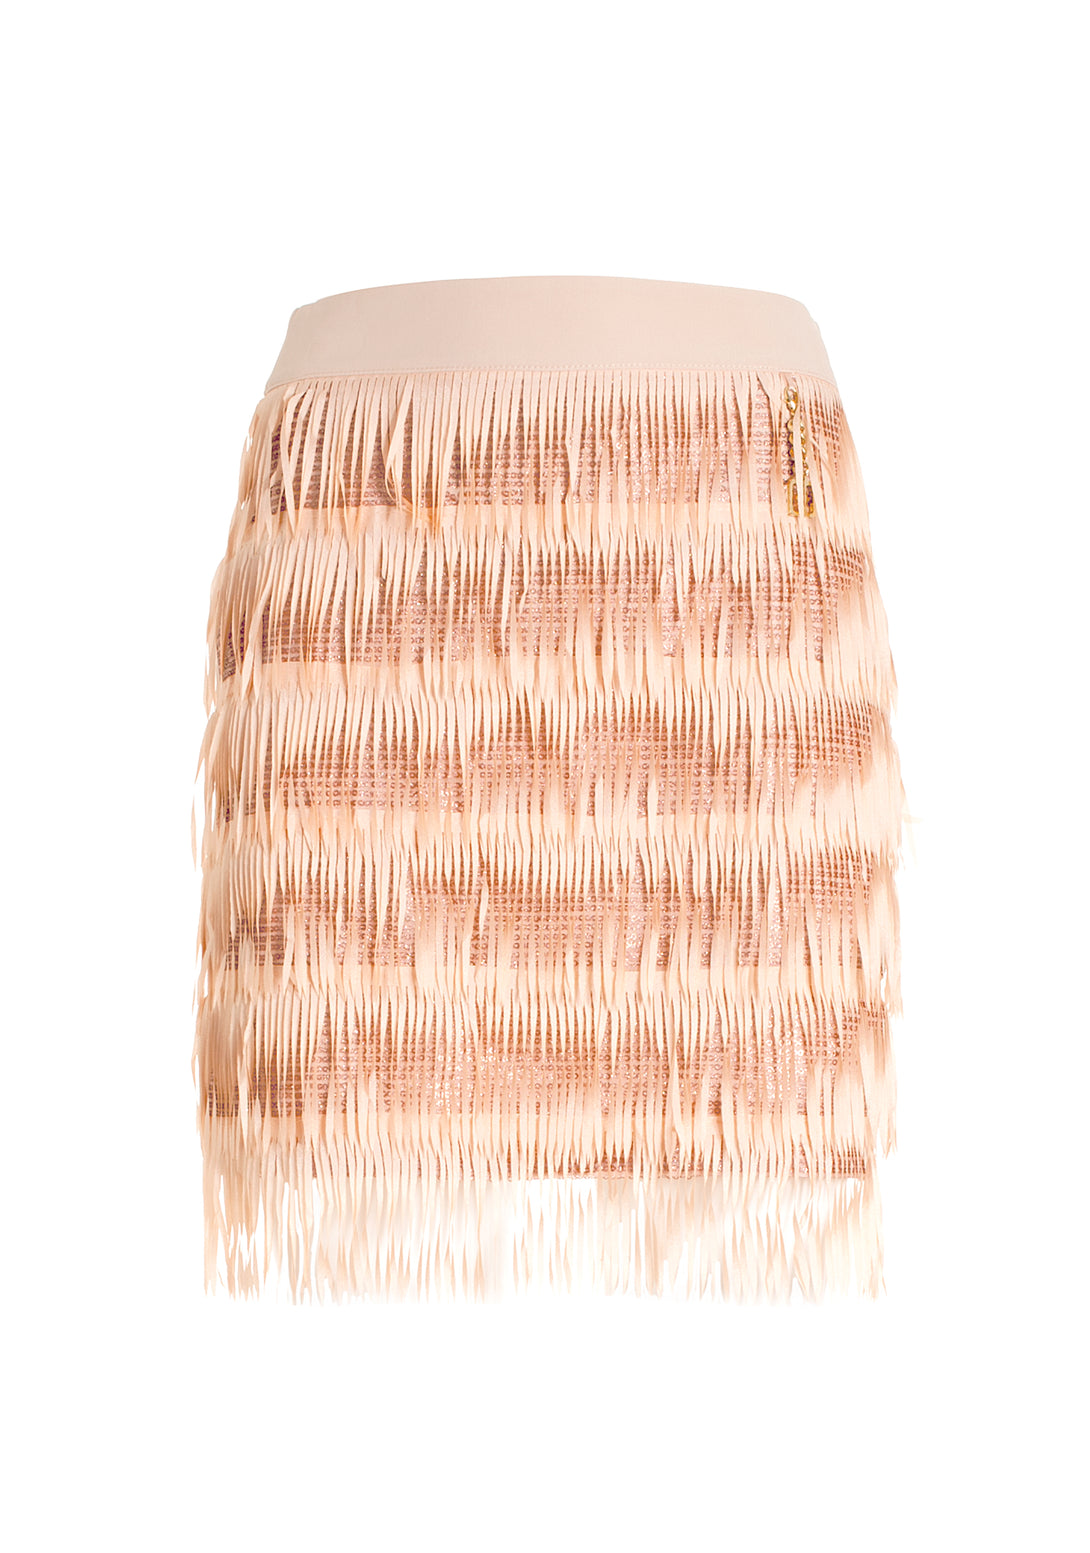 Mini skirt tight fit made in technical fabric with fringes